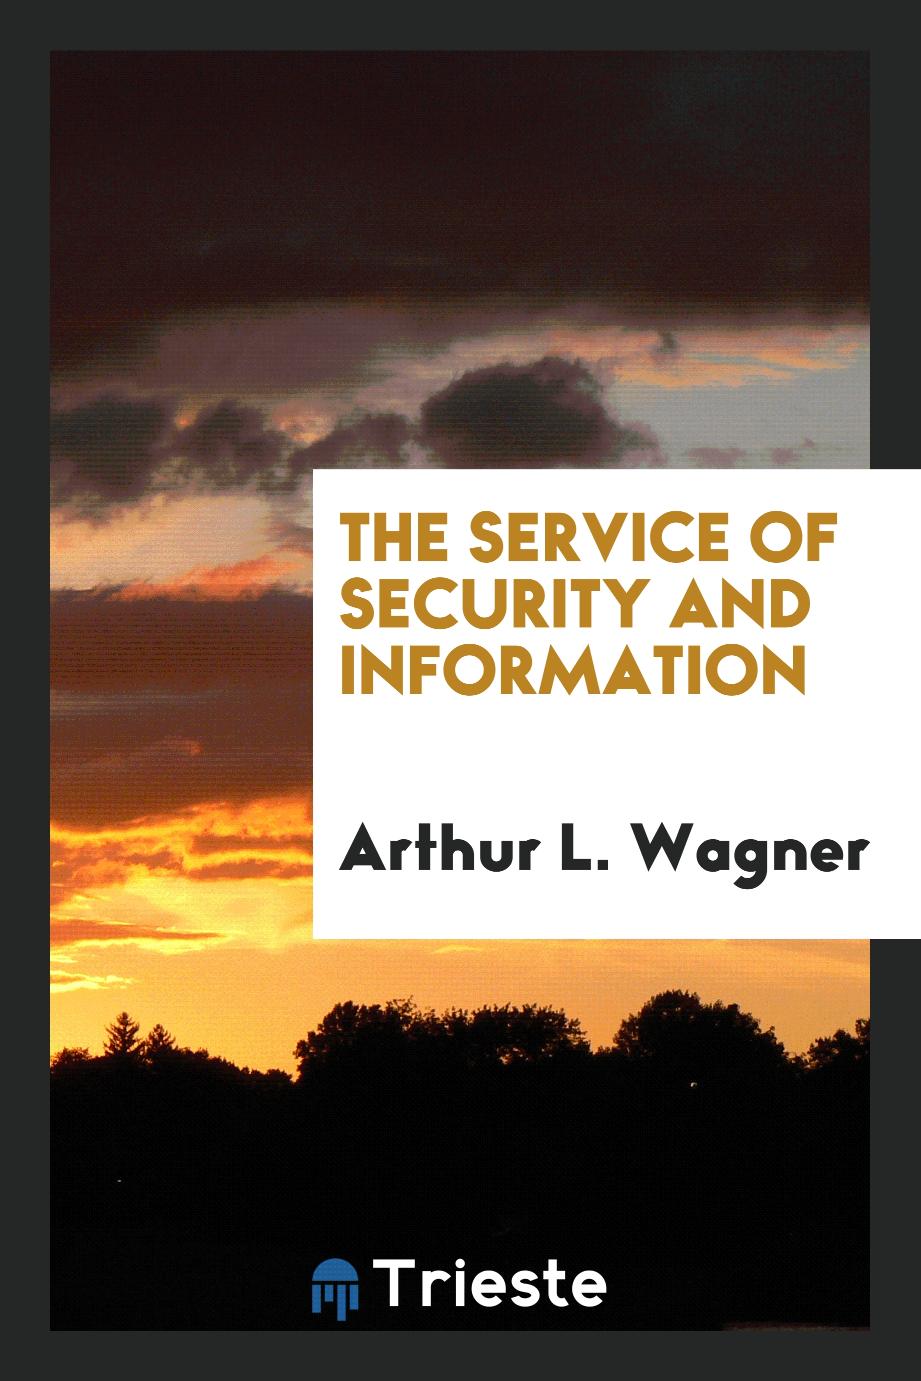 The service of security and information